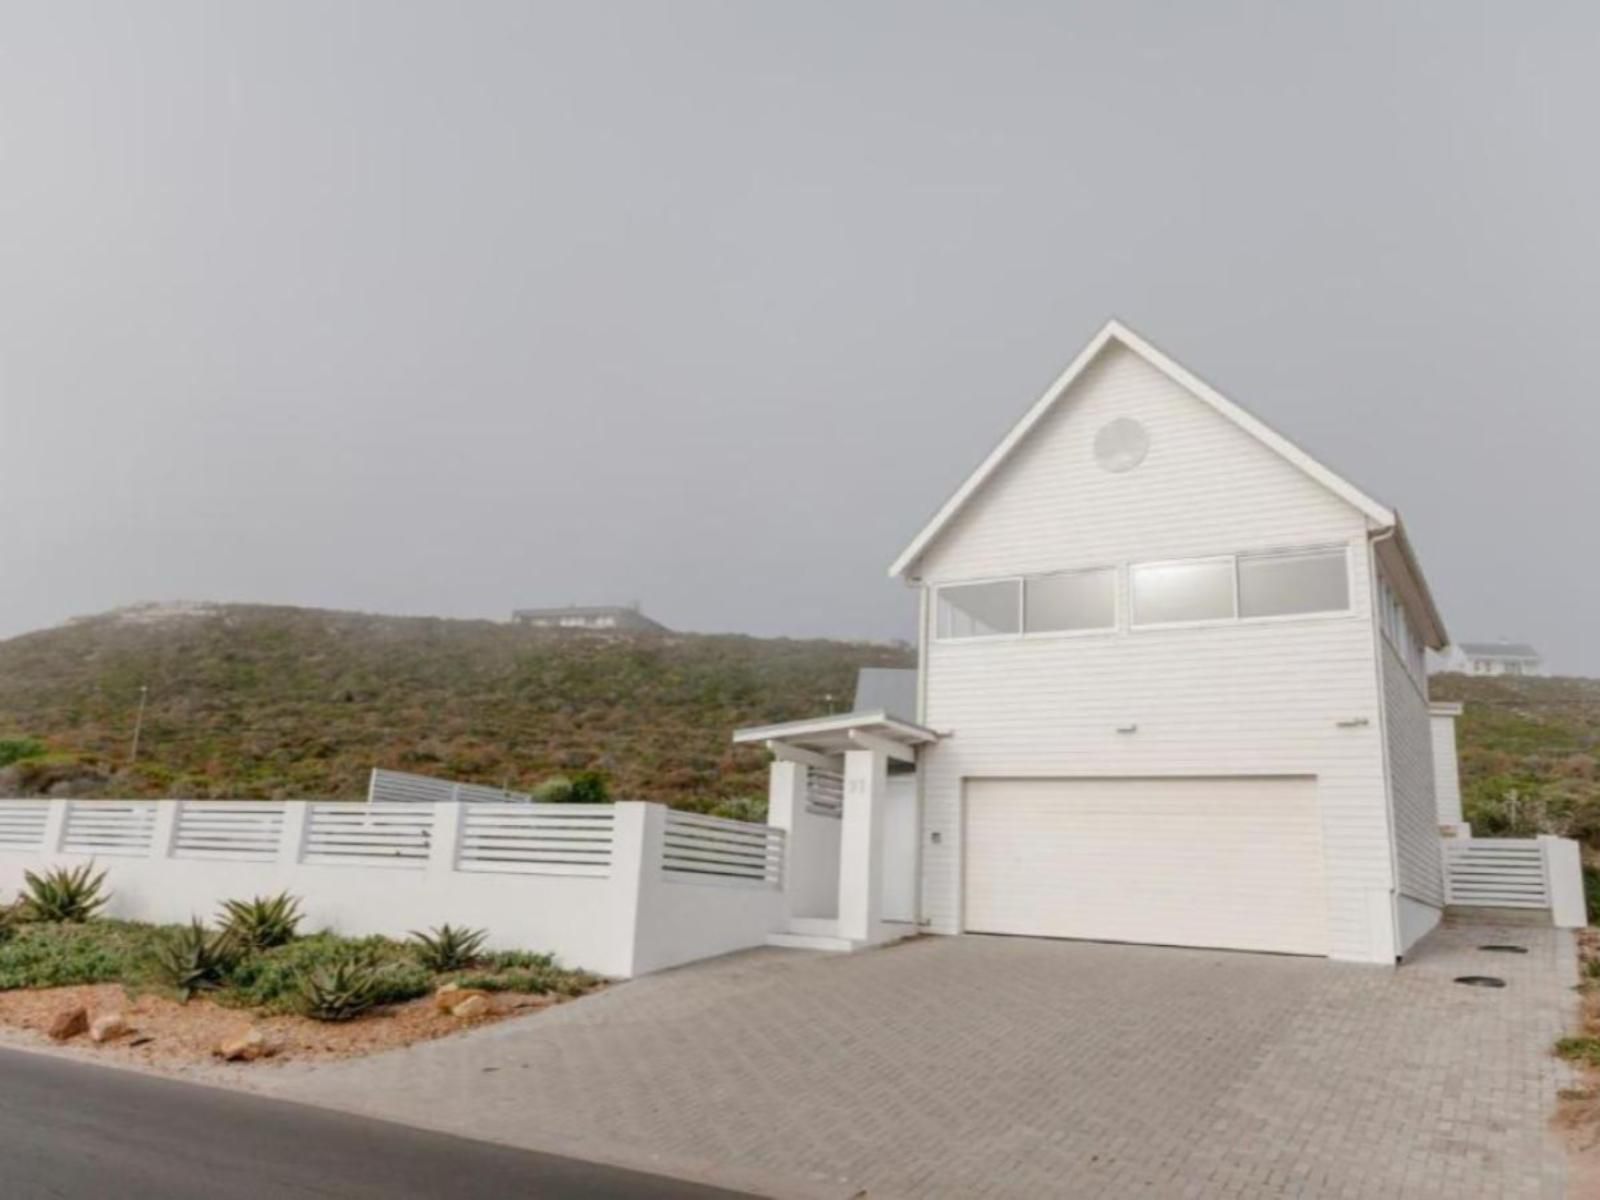 Casa Tierra Yzerfontein Western Cape South Africa Unsaturated, Building, Architecture, House